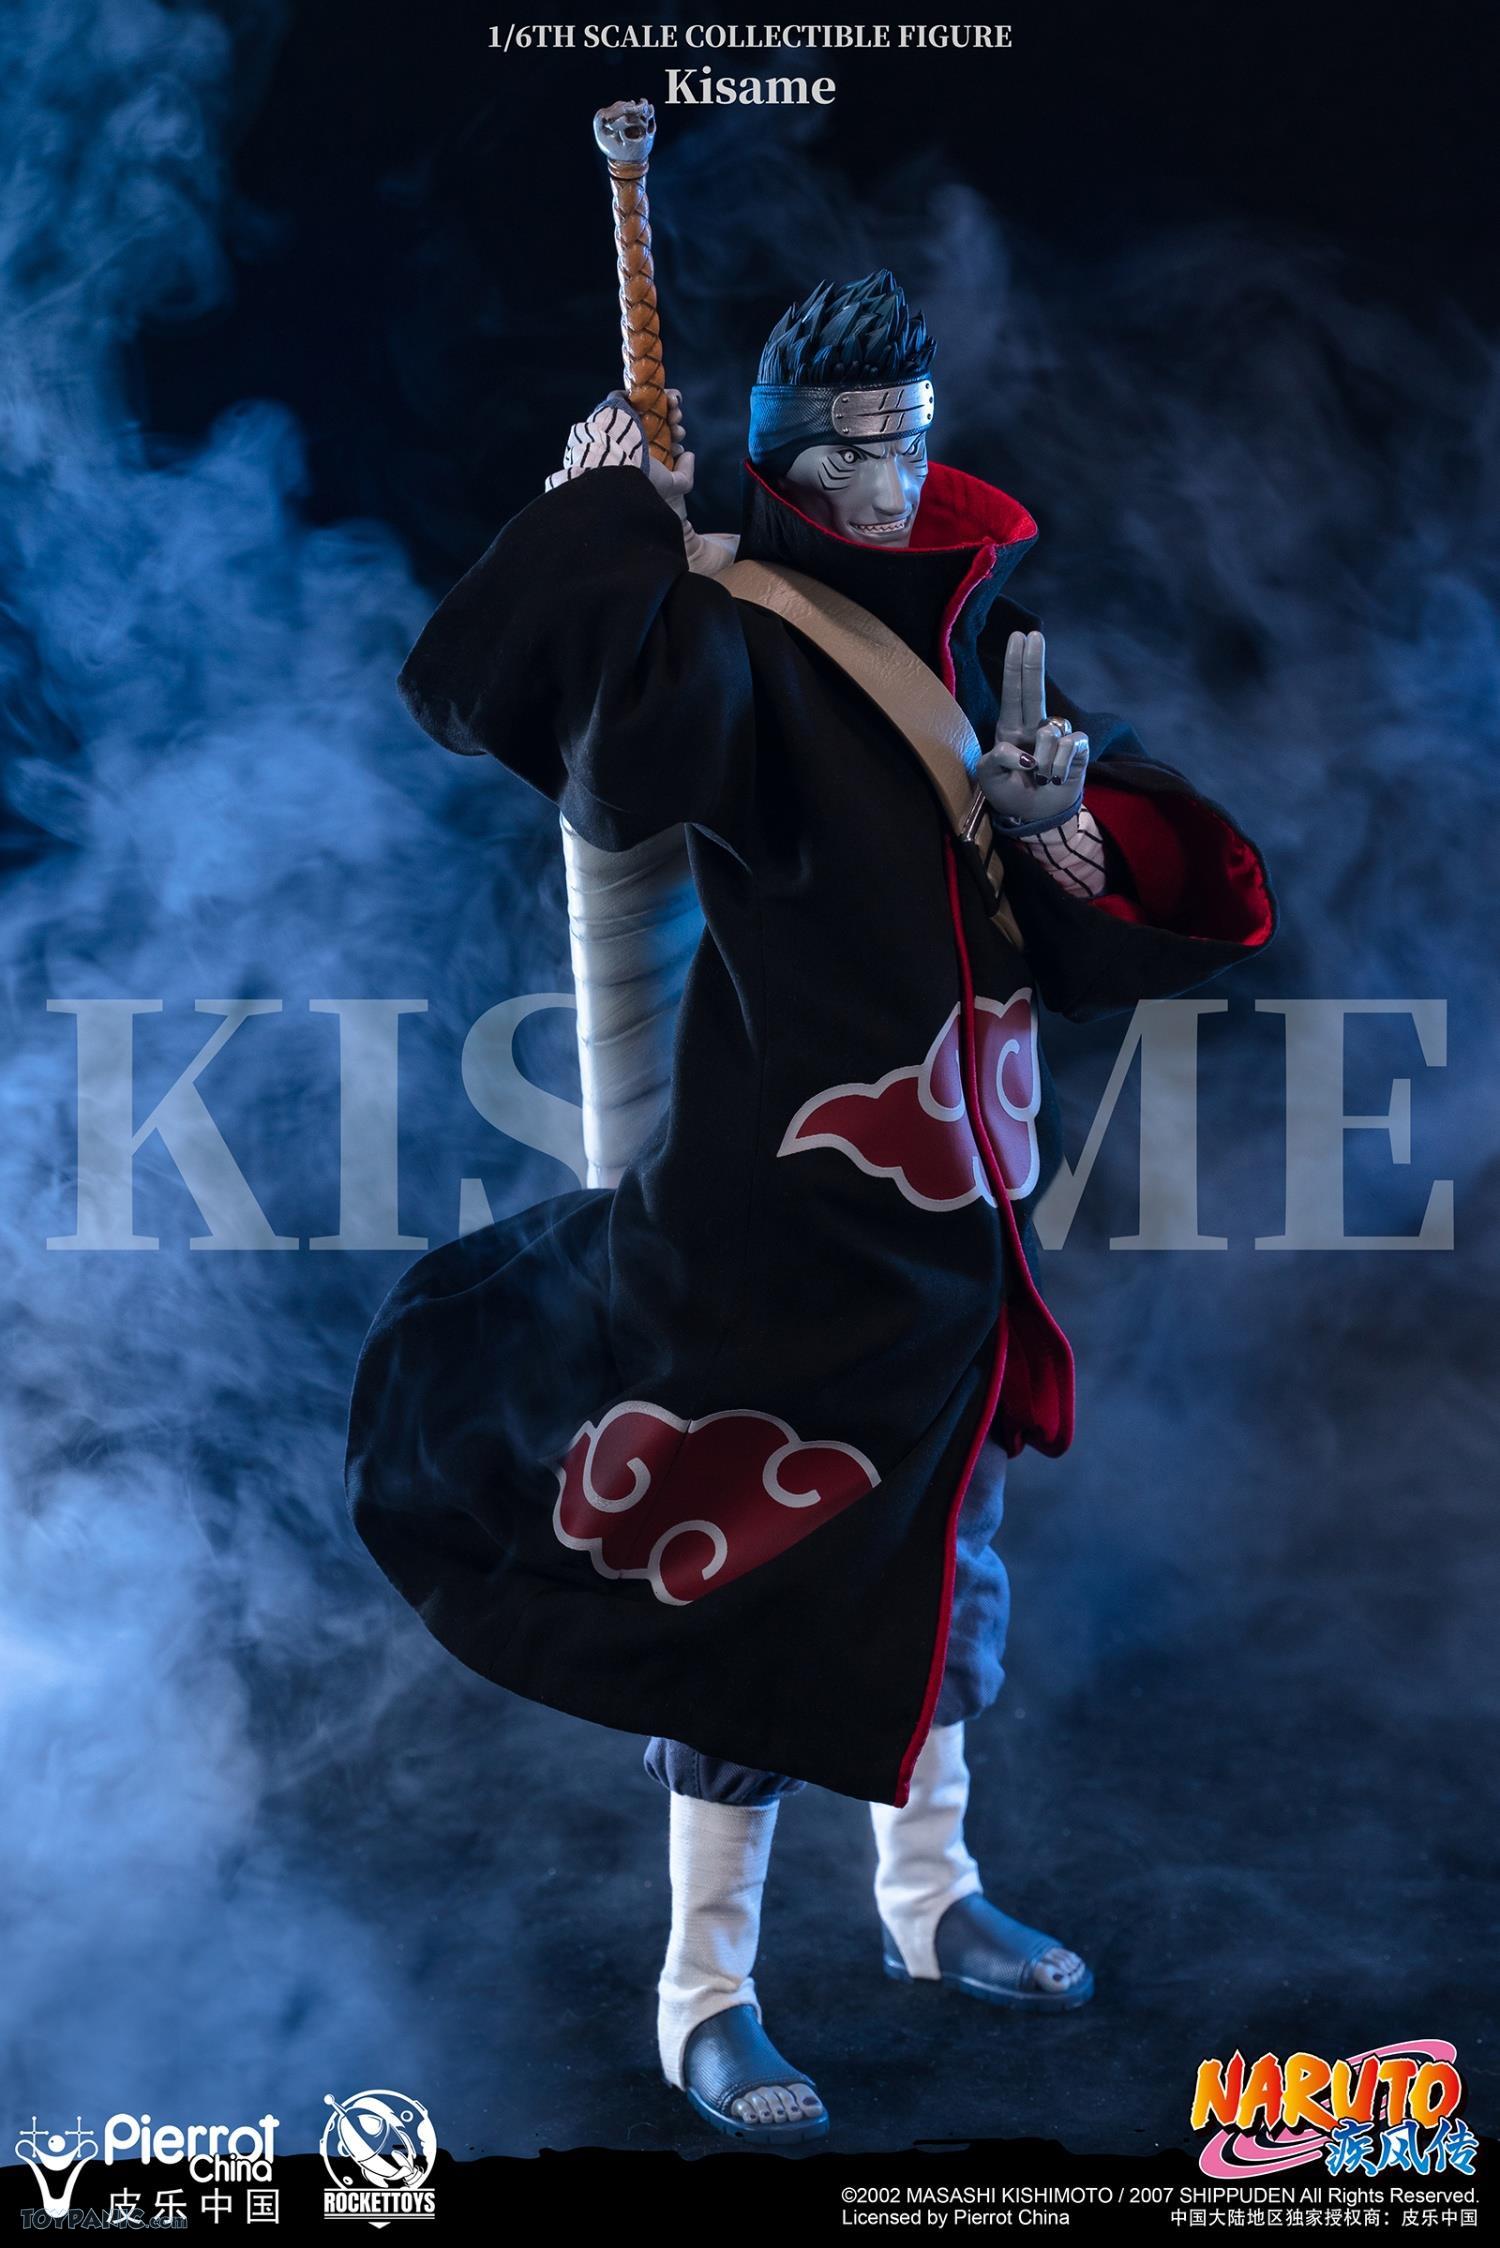 RocketToys - NEW PRODUCT: Rocket Toys ROC-007 1/6 Scale Kisame 221202460437PM_9339184